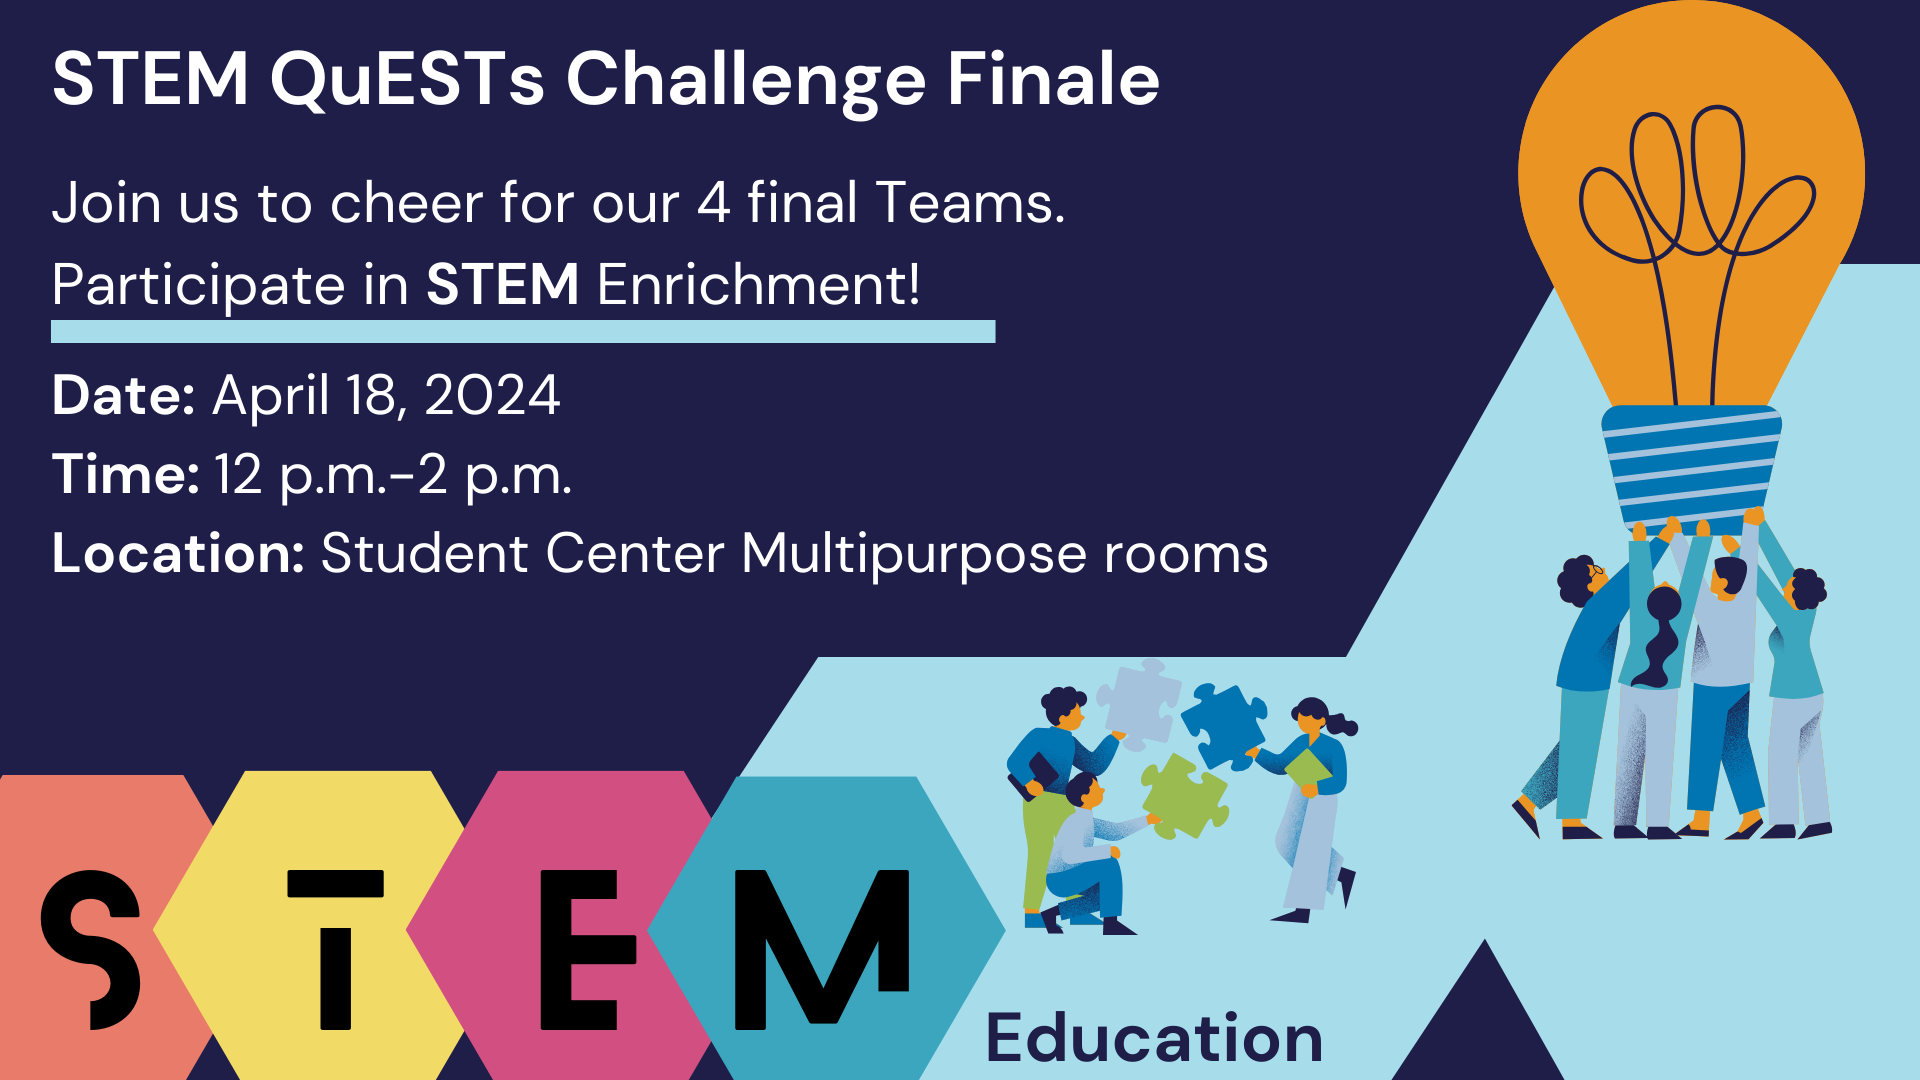 3 Students holding 3 puzzle pieces trying to connect. On the side 4 Students holding a big light bulb. STEM QuESTS Challenge Finale Join us to cheer for our 4 final Teams. Participate in STEM Enrichment! Date: April 18, 2024 Time: 12 p.m.-2 p.m. Location: Student Center Multipurpose rooms